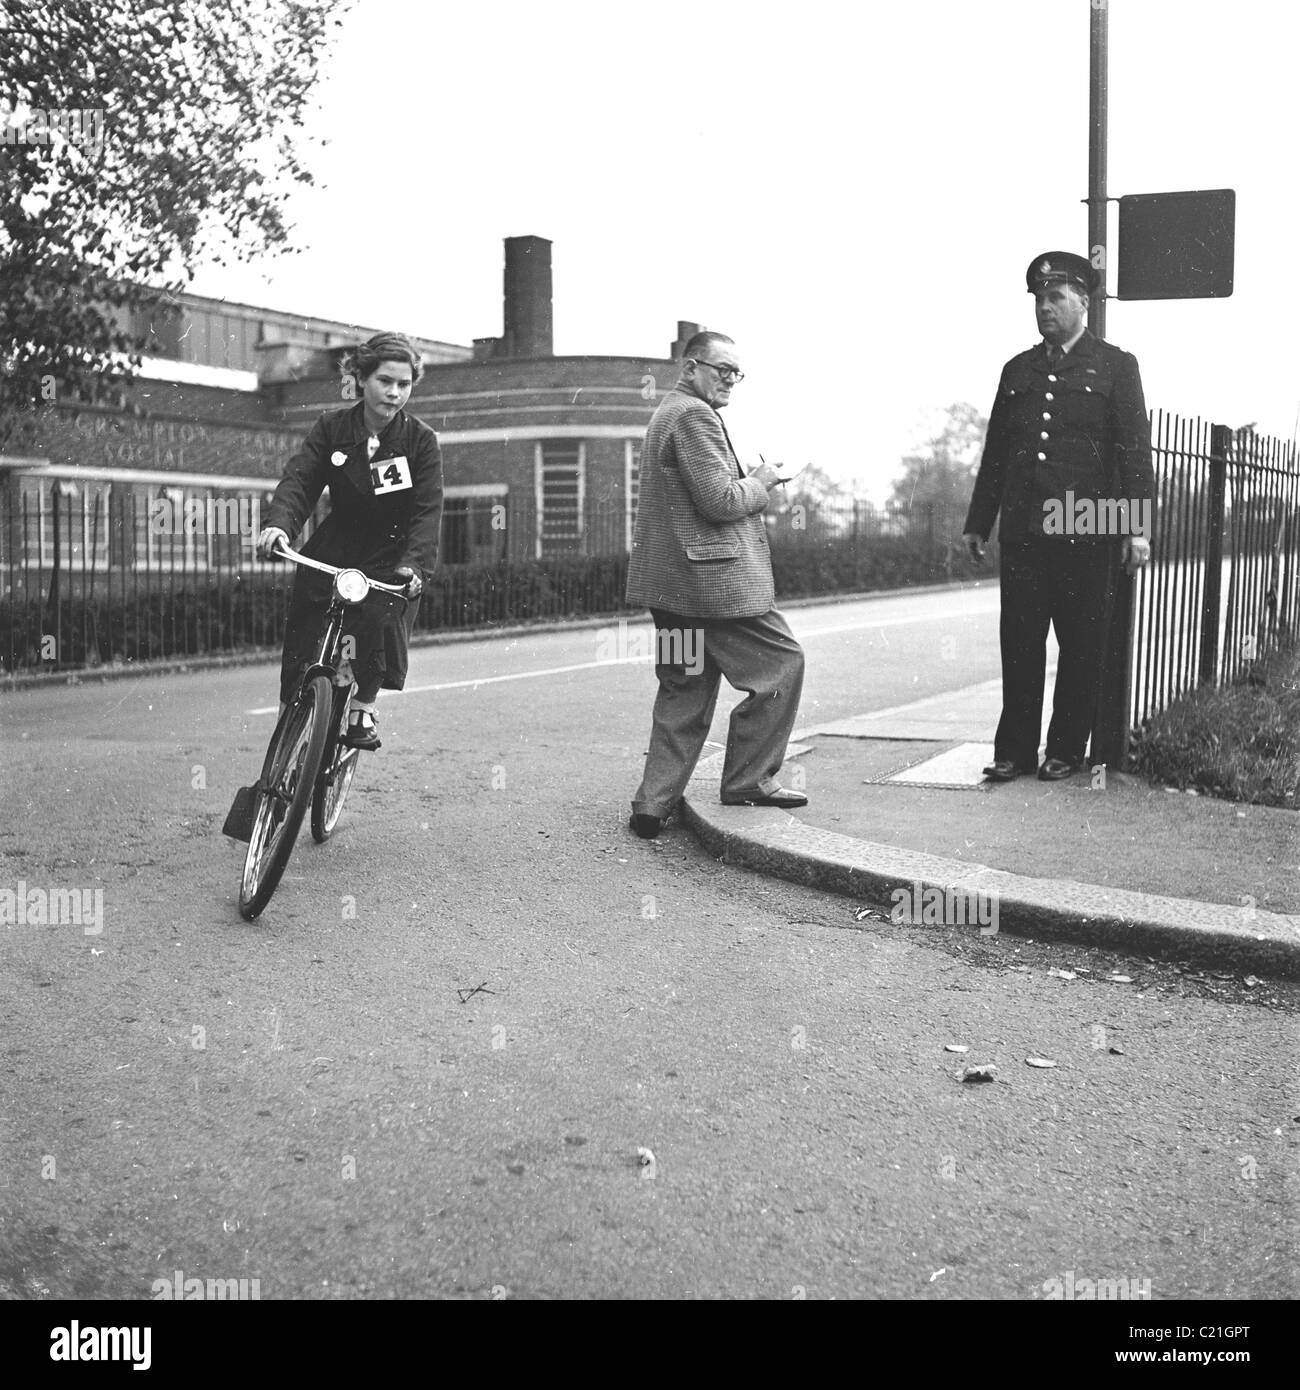 1950s, historical, standing on a pavement on a corner of a road, a policeman watches a schoolgirl doing her cycling proficiency test, England, UK. Stock Photo